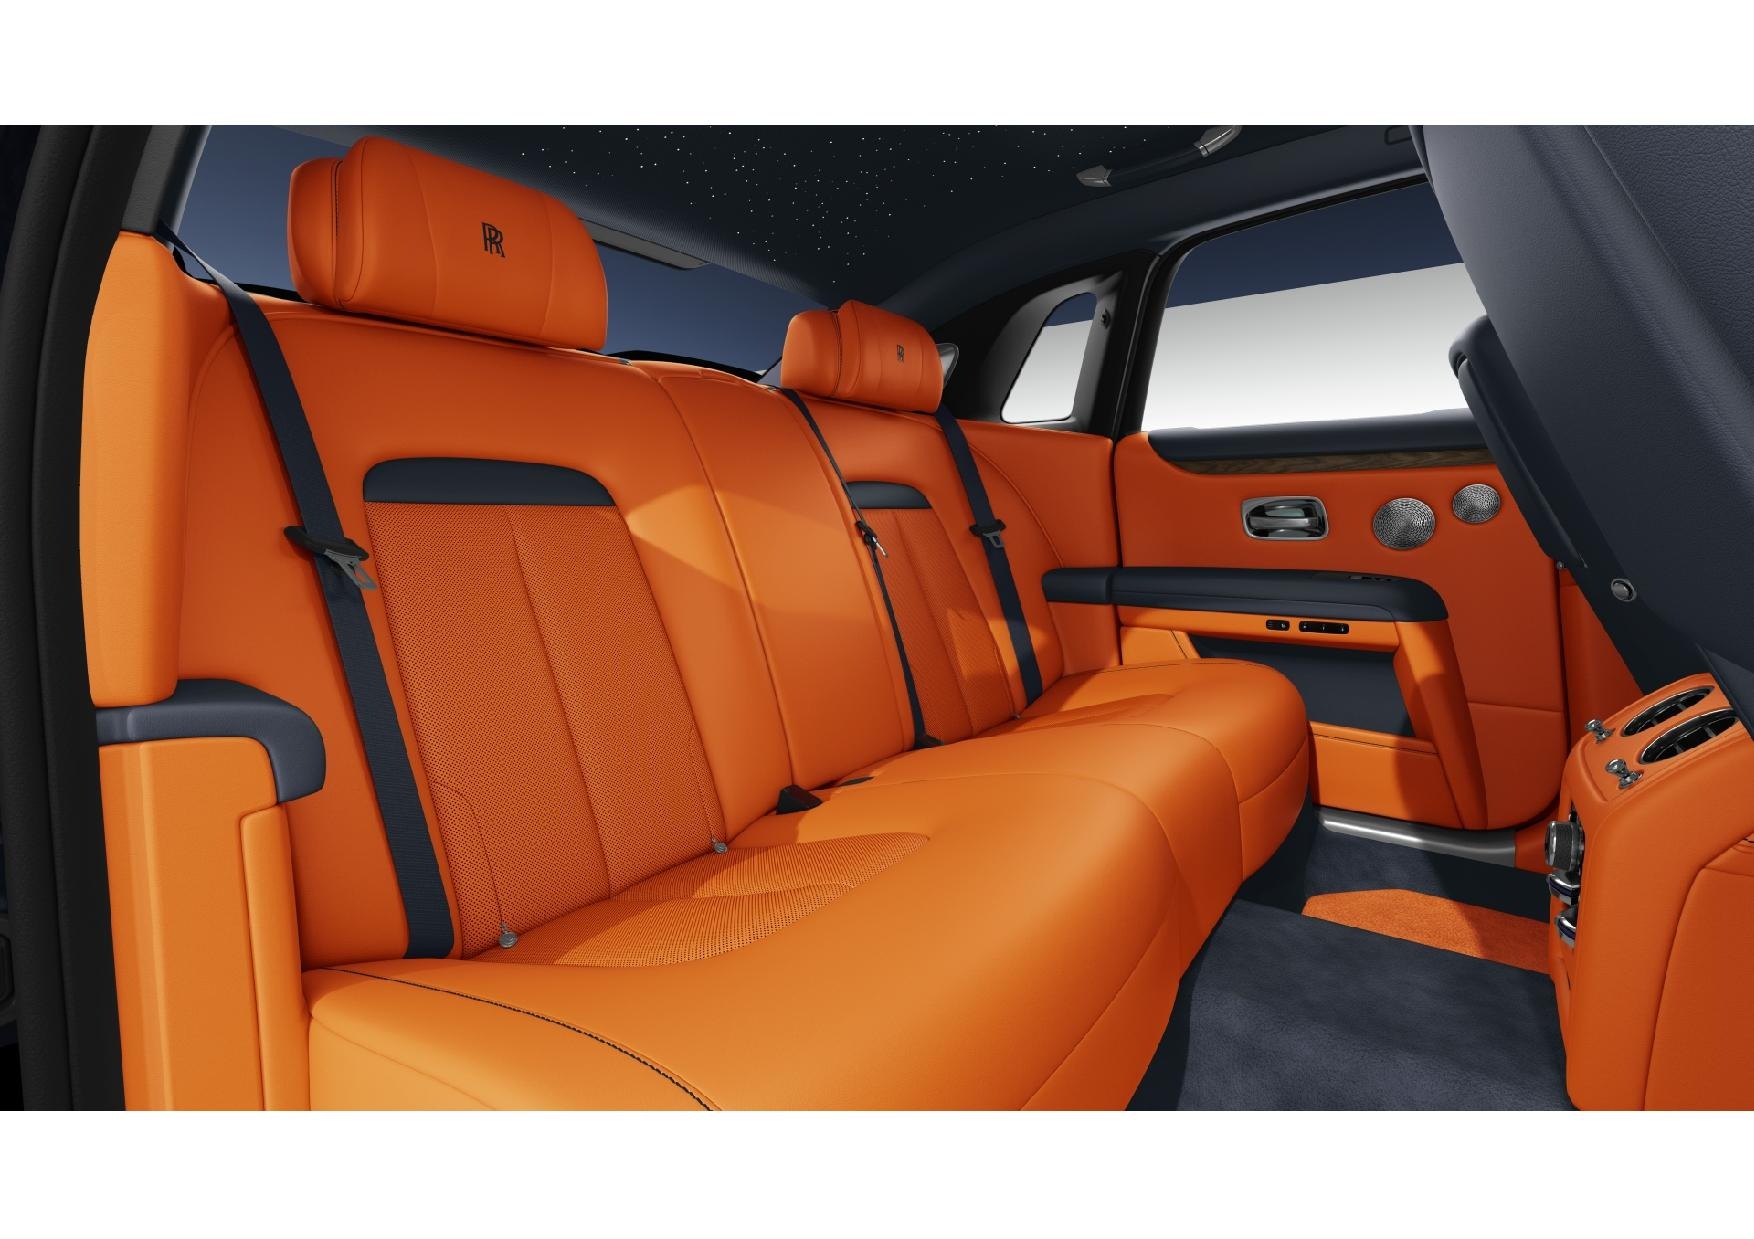 In Depth Tour Of Our Brand New  Very Orange Rolls Royce Dawn  YouTube